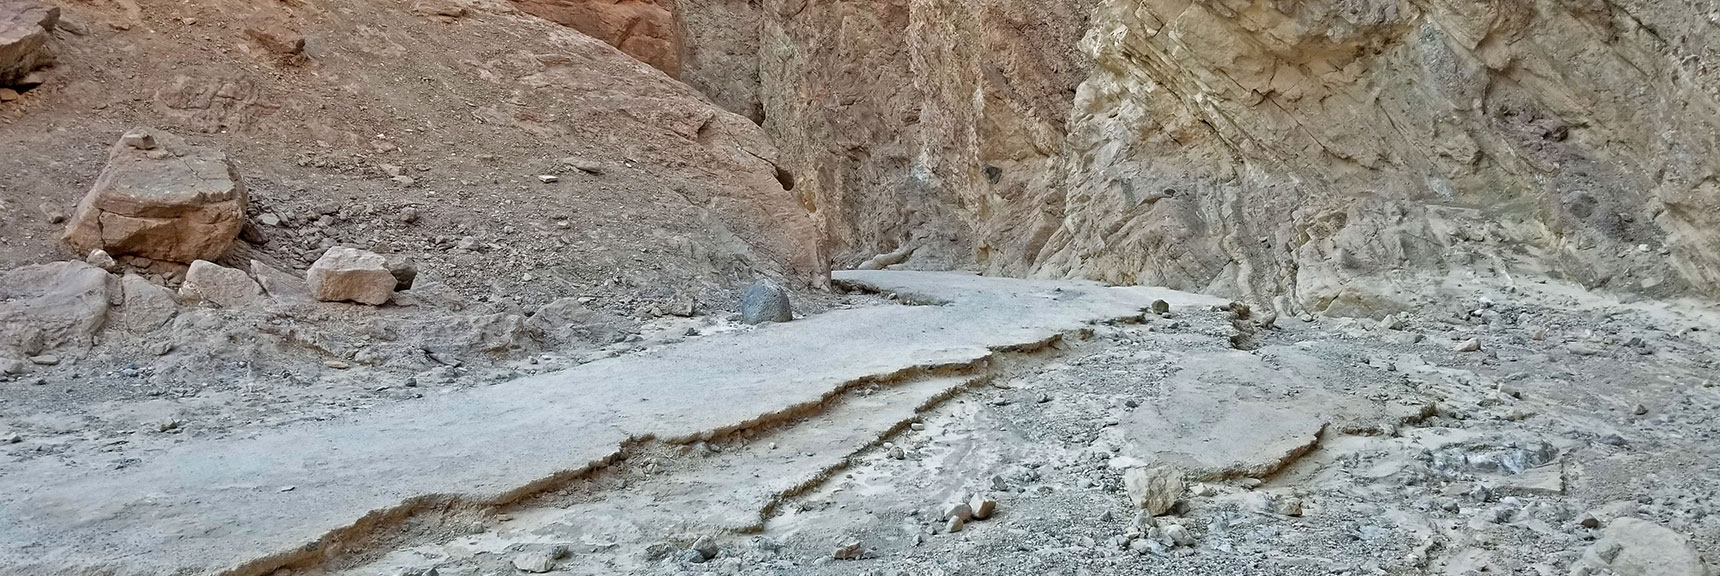 Possible Remains of a Road Through Golden Canyon in the 1960s and 70s. | Golden Canyon to Zabriskie Point | Death Valley National Park, California